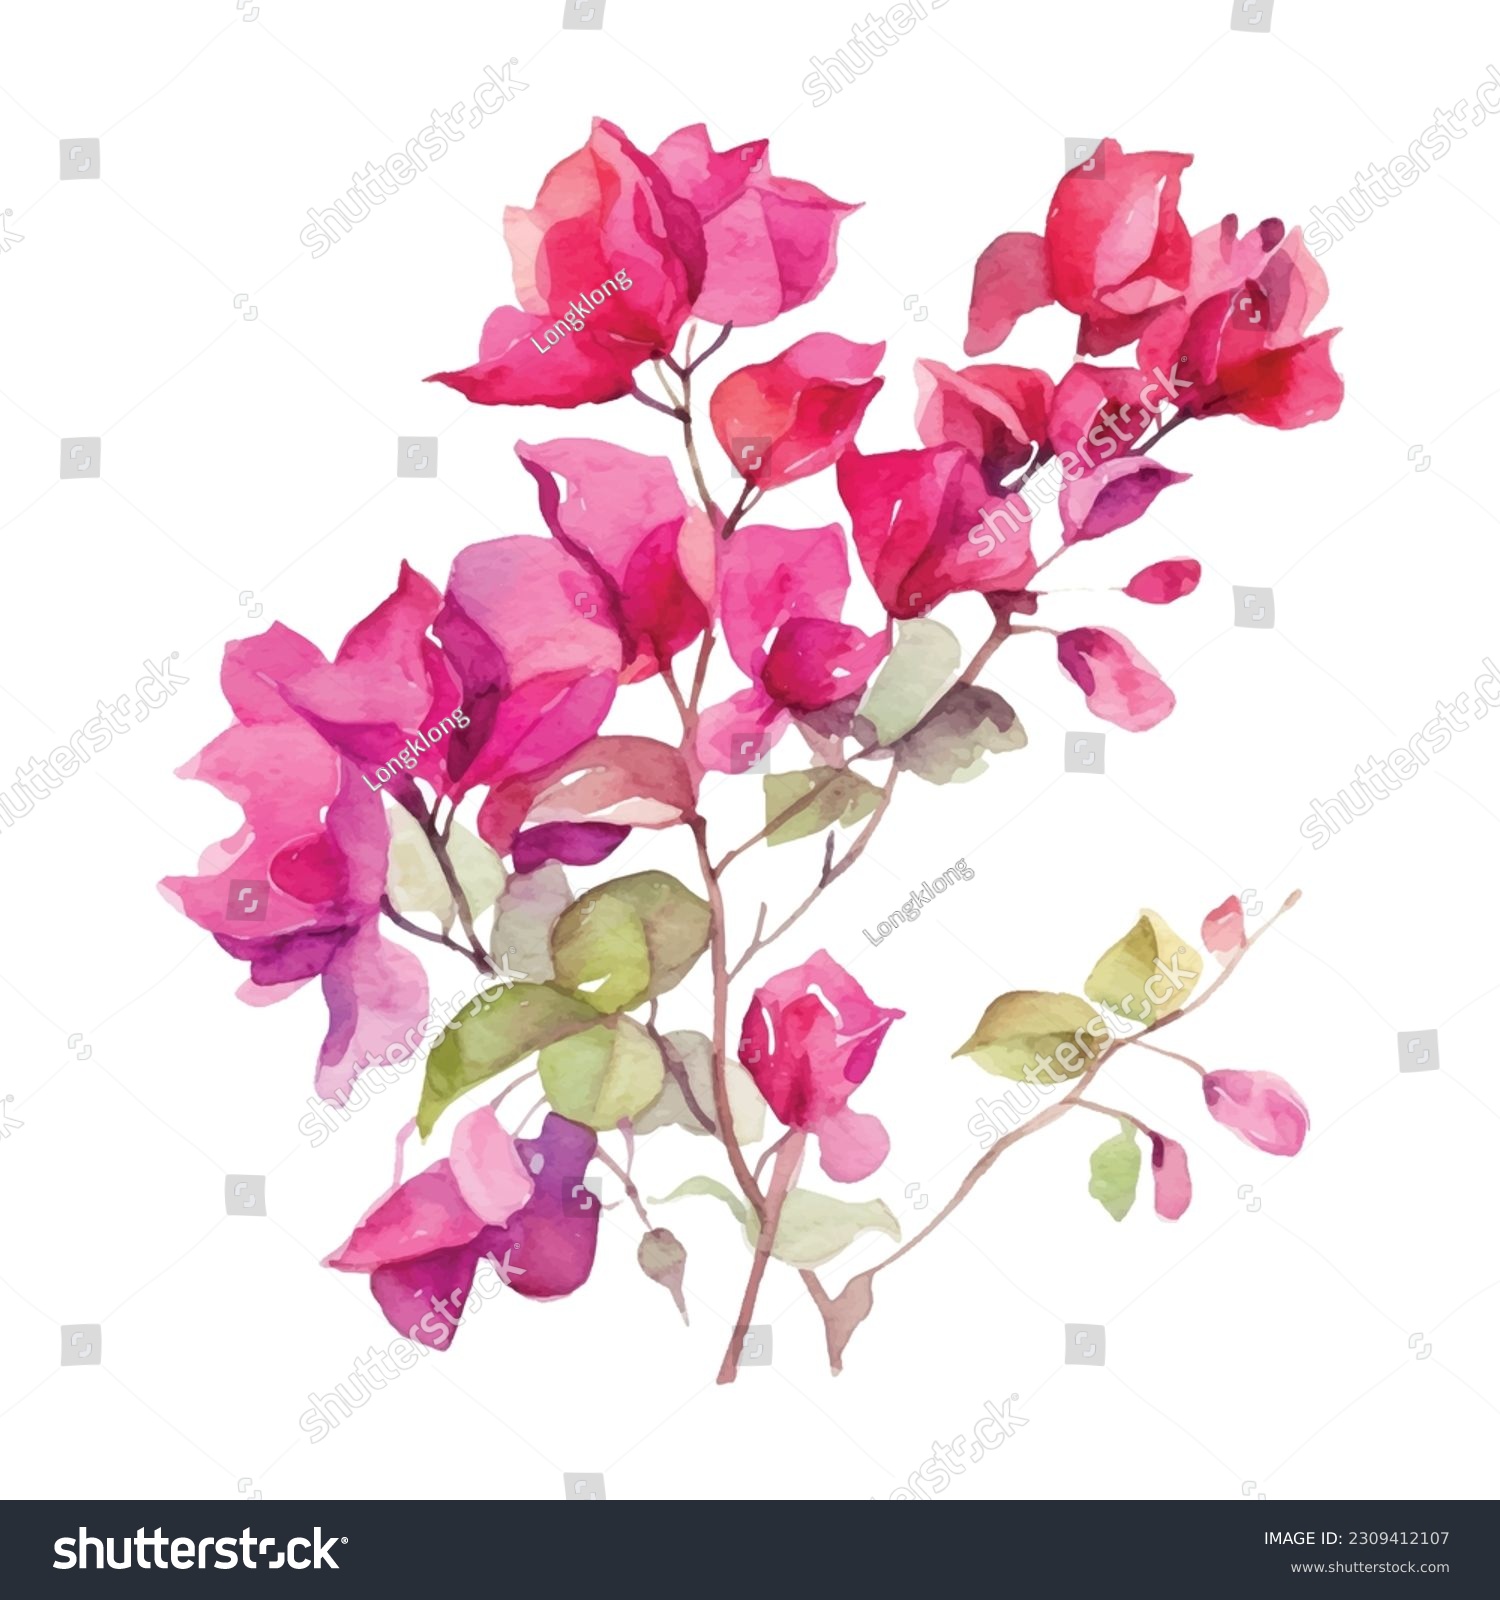 SVG of Watercolor hand drawn pink bougainvillea flower. Can be used as print, postcard, package design, invitation, greeting card, textile, stickers. svg